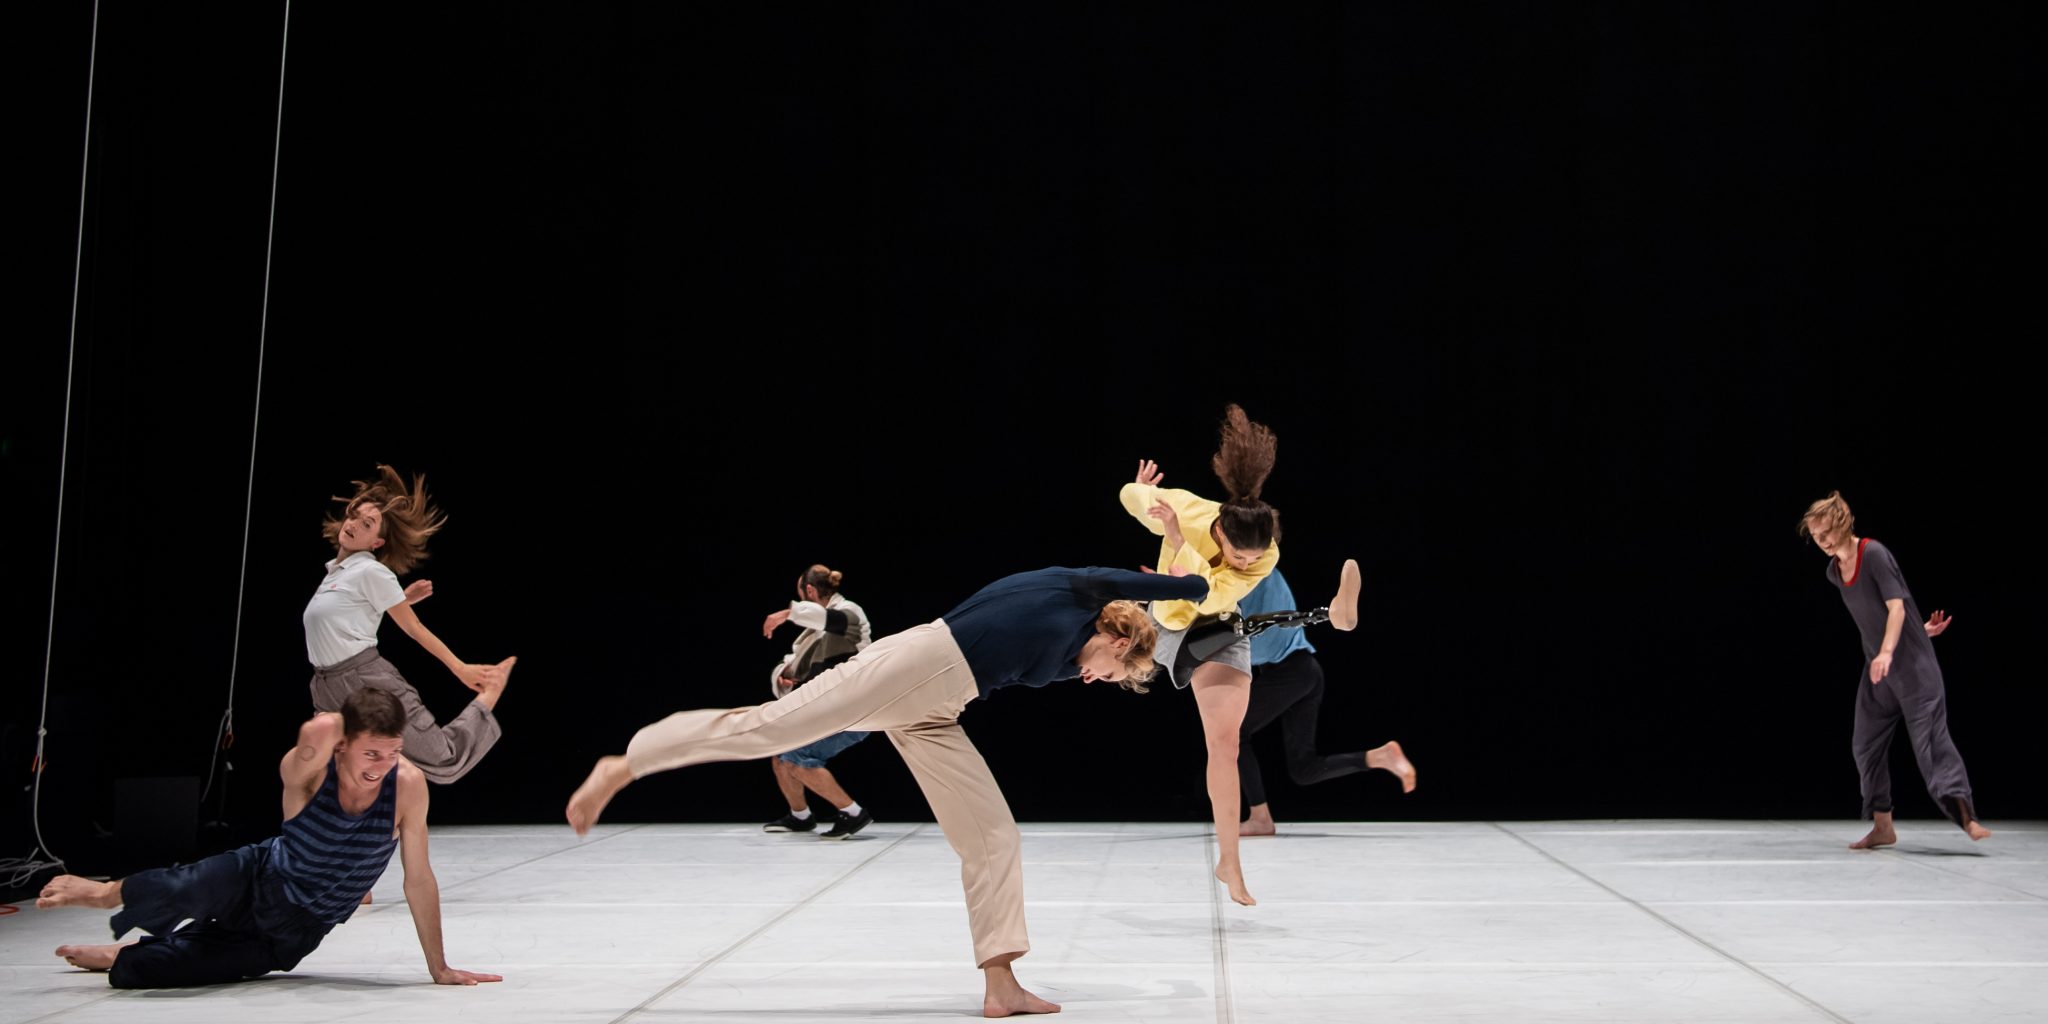 Candoco perform Hot Mess, choreographed by Theo Clinkard performed at Laban Theatre, London, UK, 25th July 2019